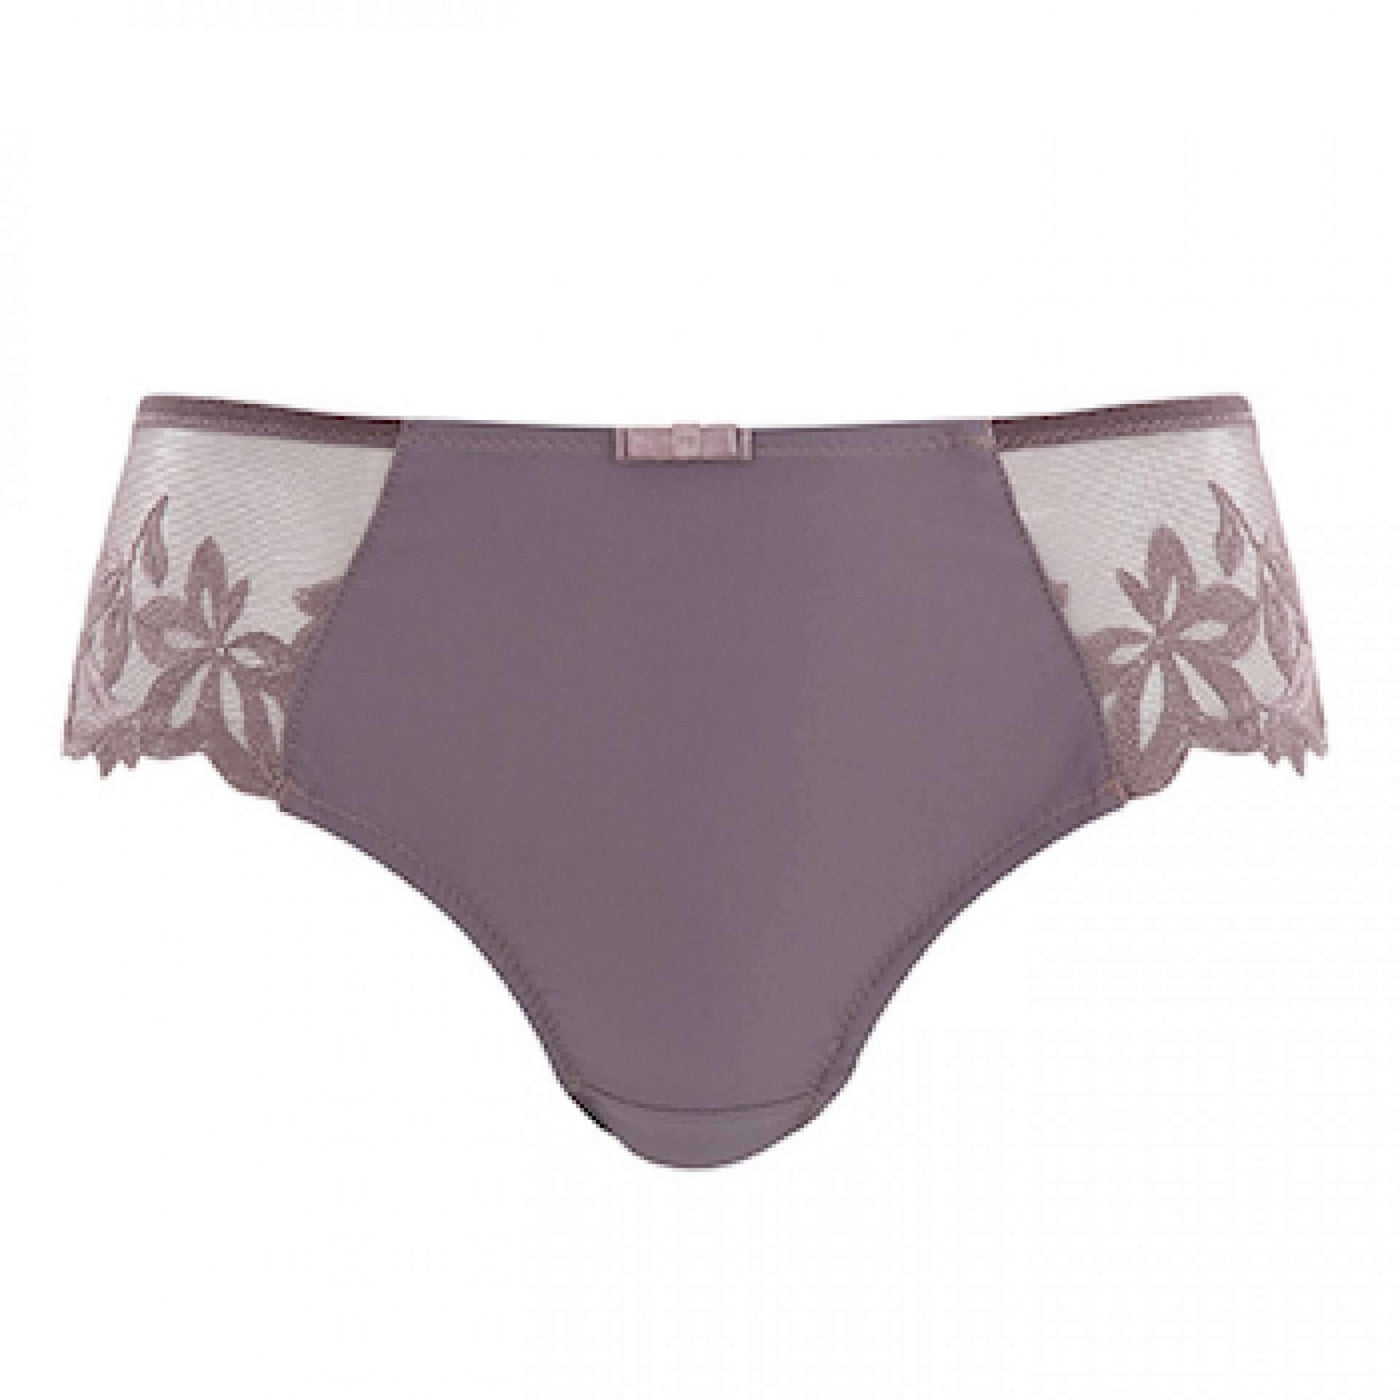 Panache Penny Brief 9472-Panties-Panache-Heather-Small-Anna Bella Fine Lingerie, Reveal Your Most Gorgeous Self!